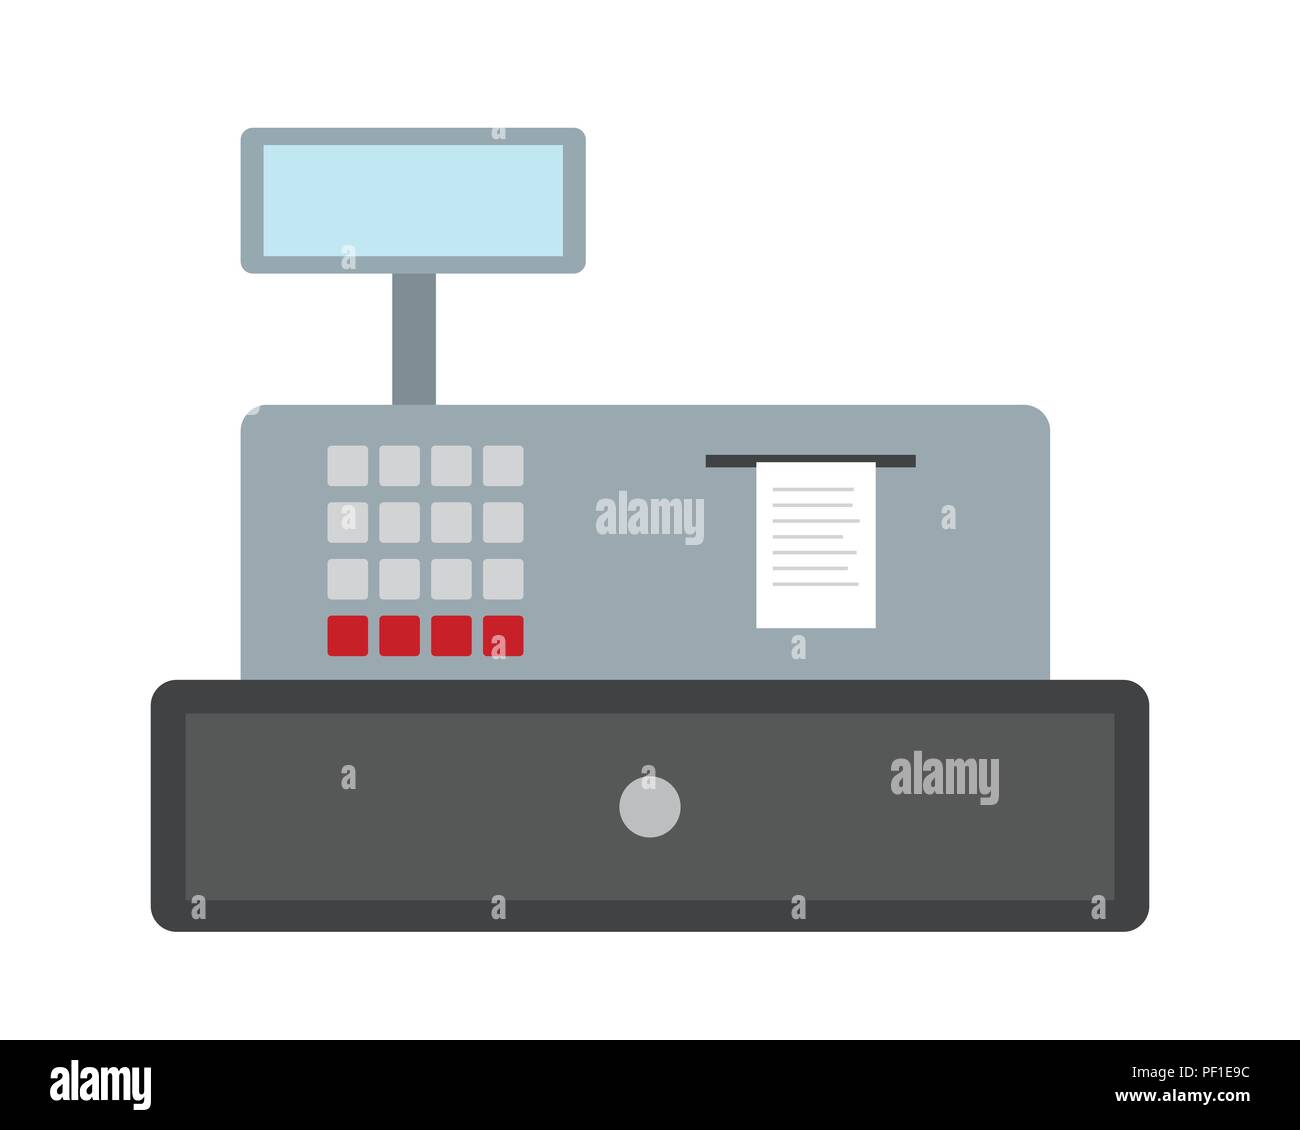 Flat design illustration of a cash desk with blank display, buttons and printed paper receipt - vector, isolated on white background Stock Vector